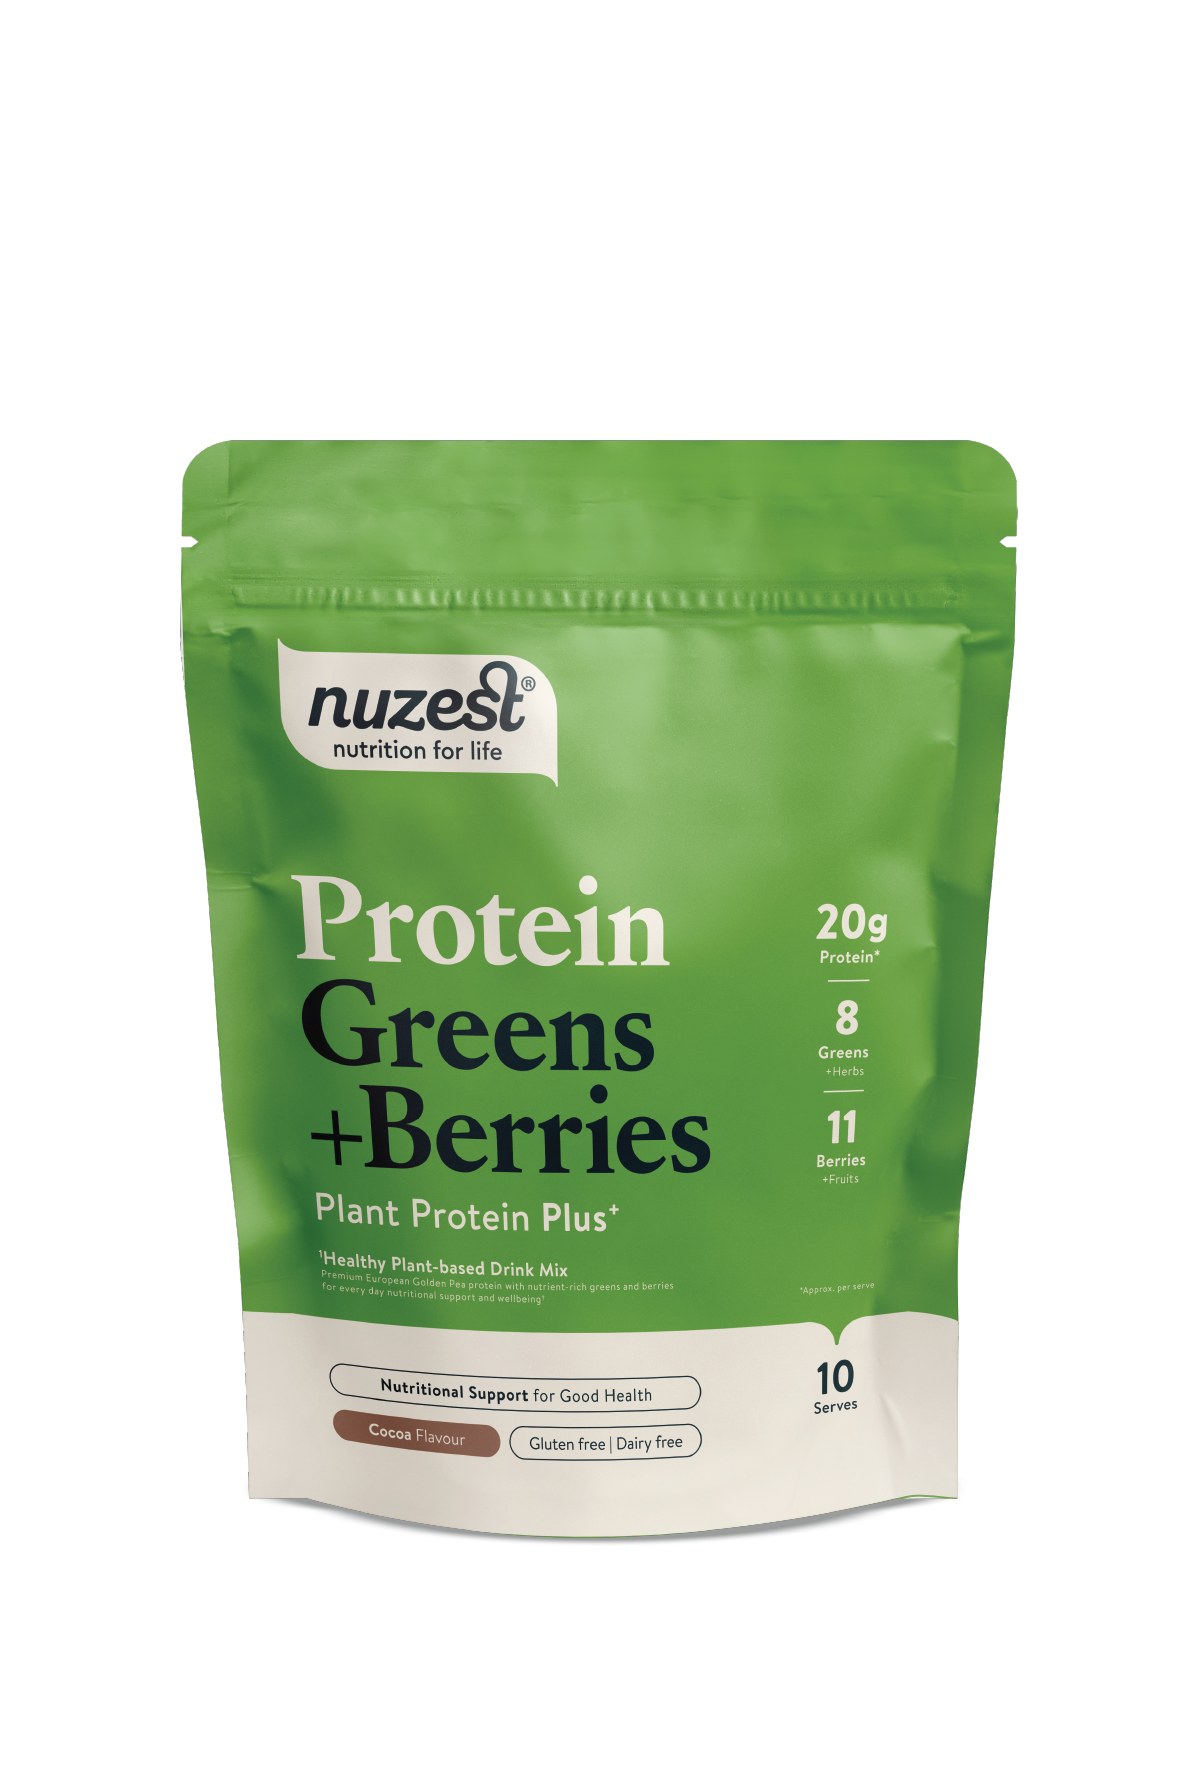 Nuzest Protein Greens + Berries Cocoa Flavour